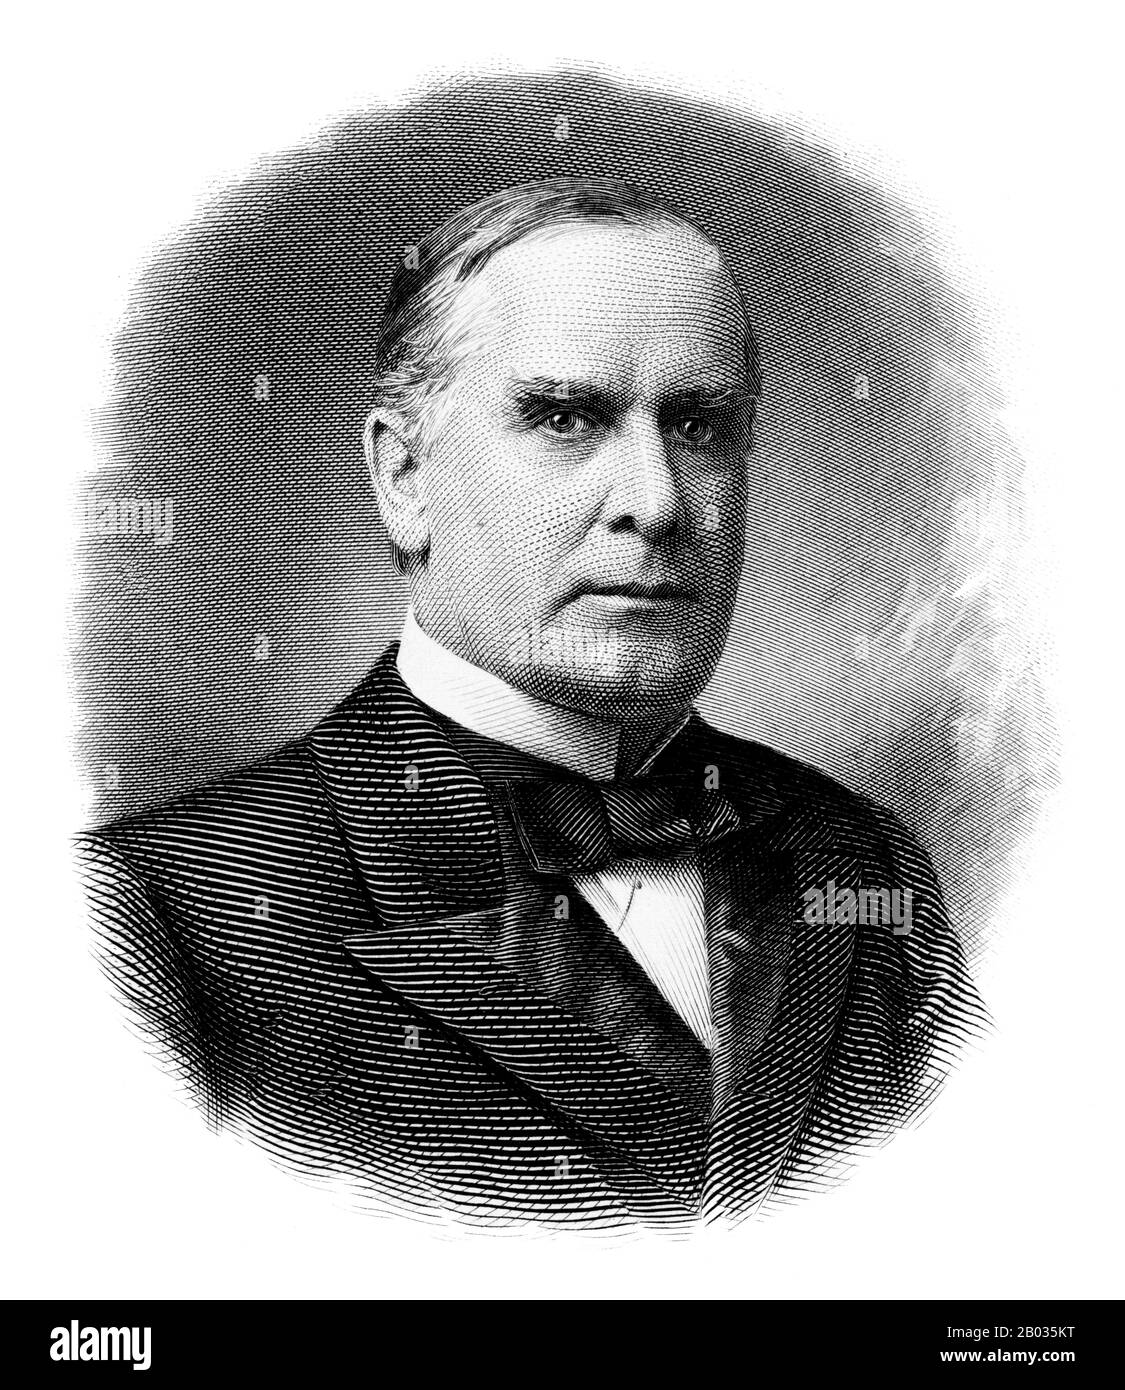 William McKinley (January 29, 1843 – September 14, 1901) was an American politician and lawyer who served as the 25th President of the United States from March 4, 1897 until his assassination in September 1901, six months into his second term.  McKinley led the nation to victory in the Spanish–American War, raised protective tariffs to promote American industry, and maintained the nation on the gold standard in a rejection of inflationary proposals. Stock Photo